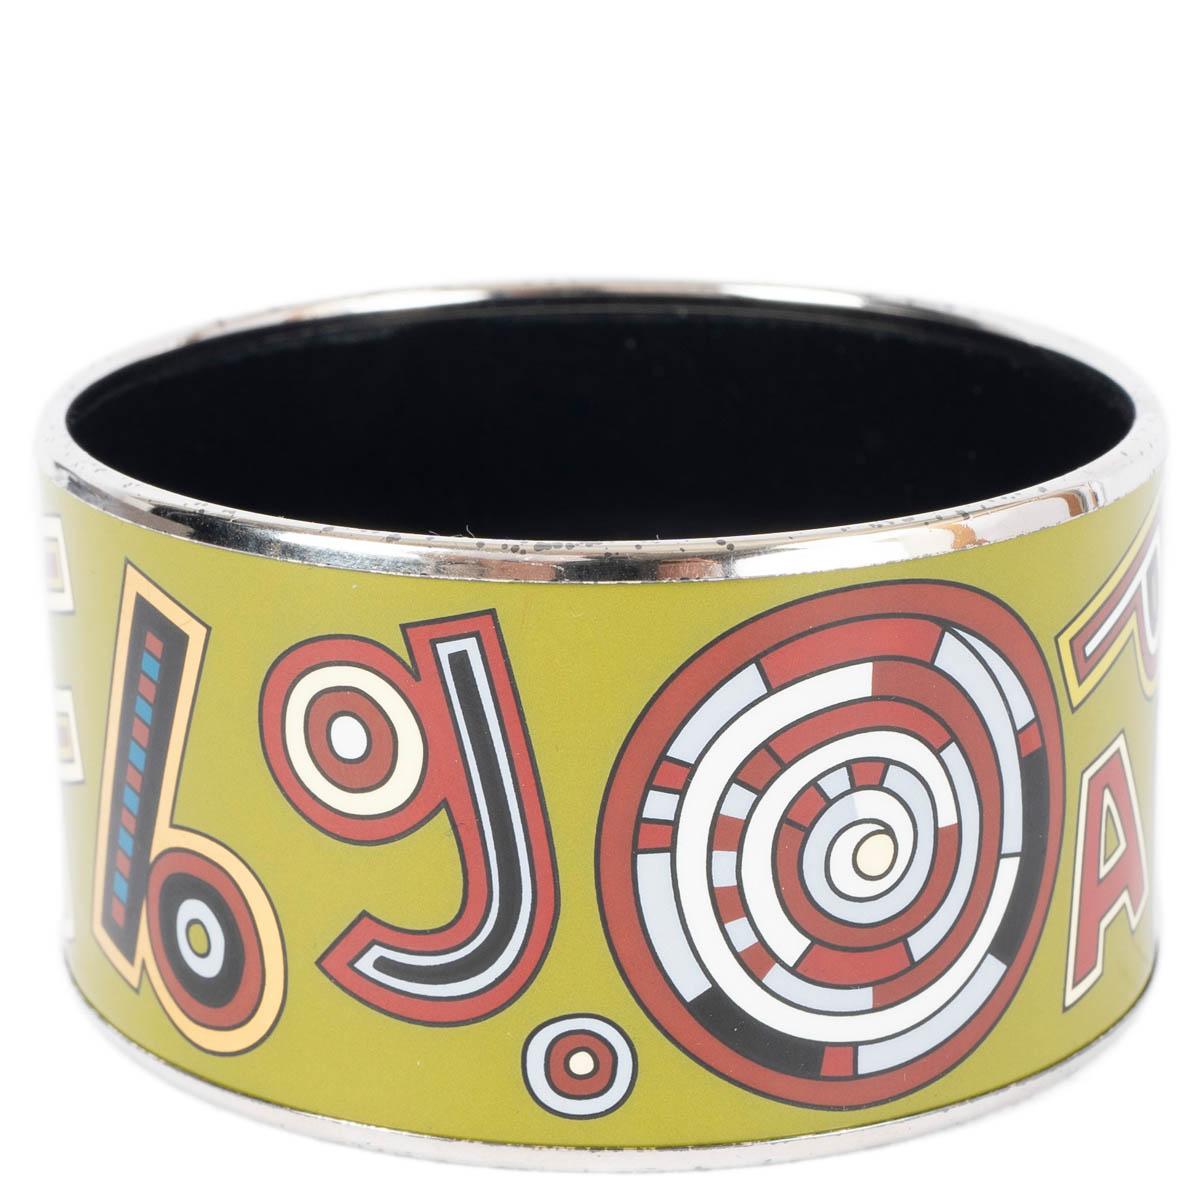 100% authentic Hermès Tohu-Bohu extra-wide bangle in khaki green and multicolor enamel with palladium hardware. Has been worn and is in excellent condition.

Measurements
Tag Size	L
Width	6cm (2.3in)
Circumference	19cm